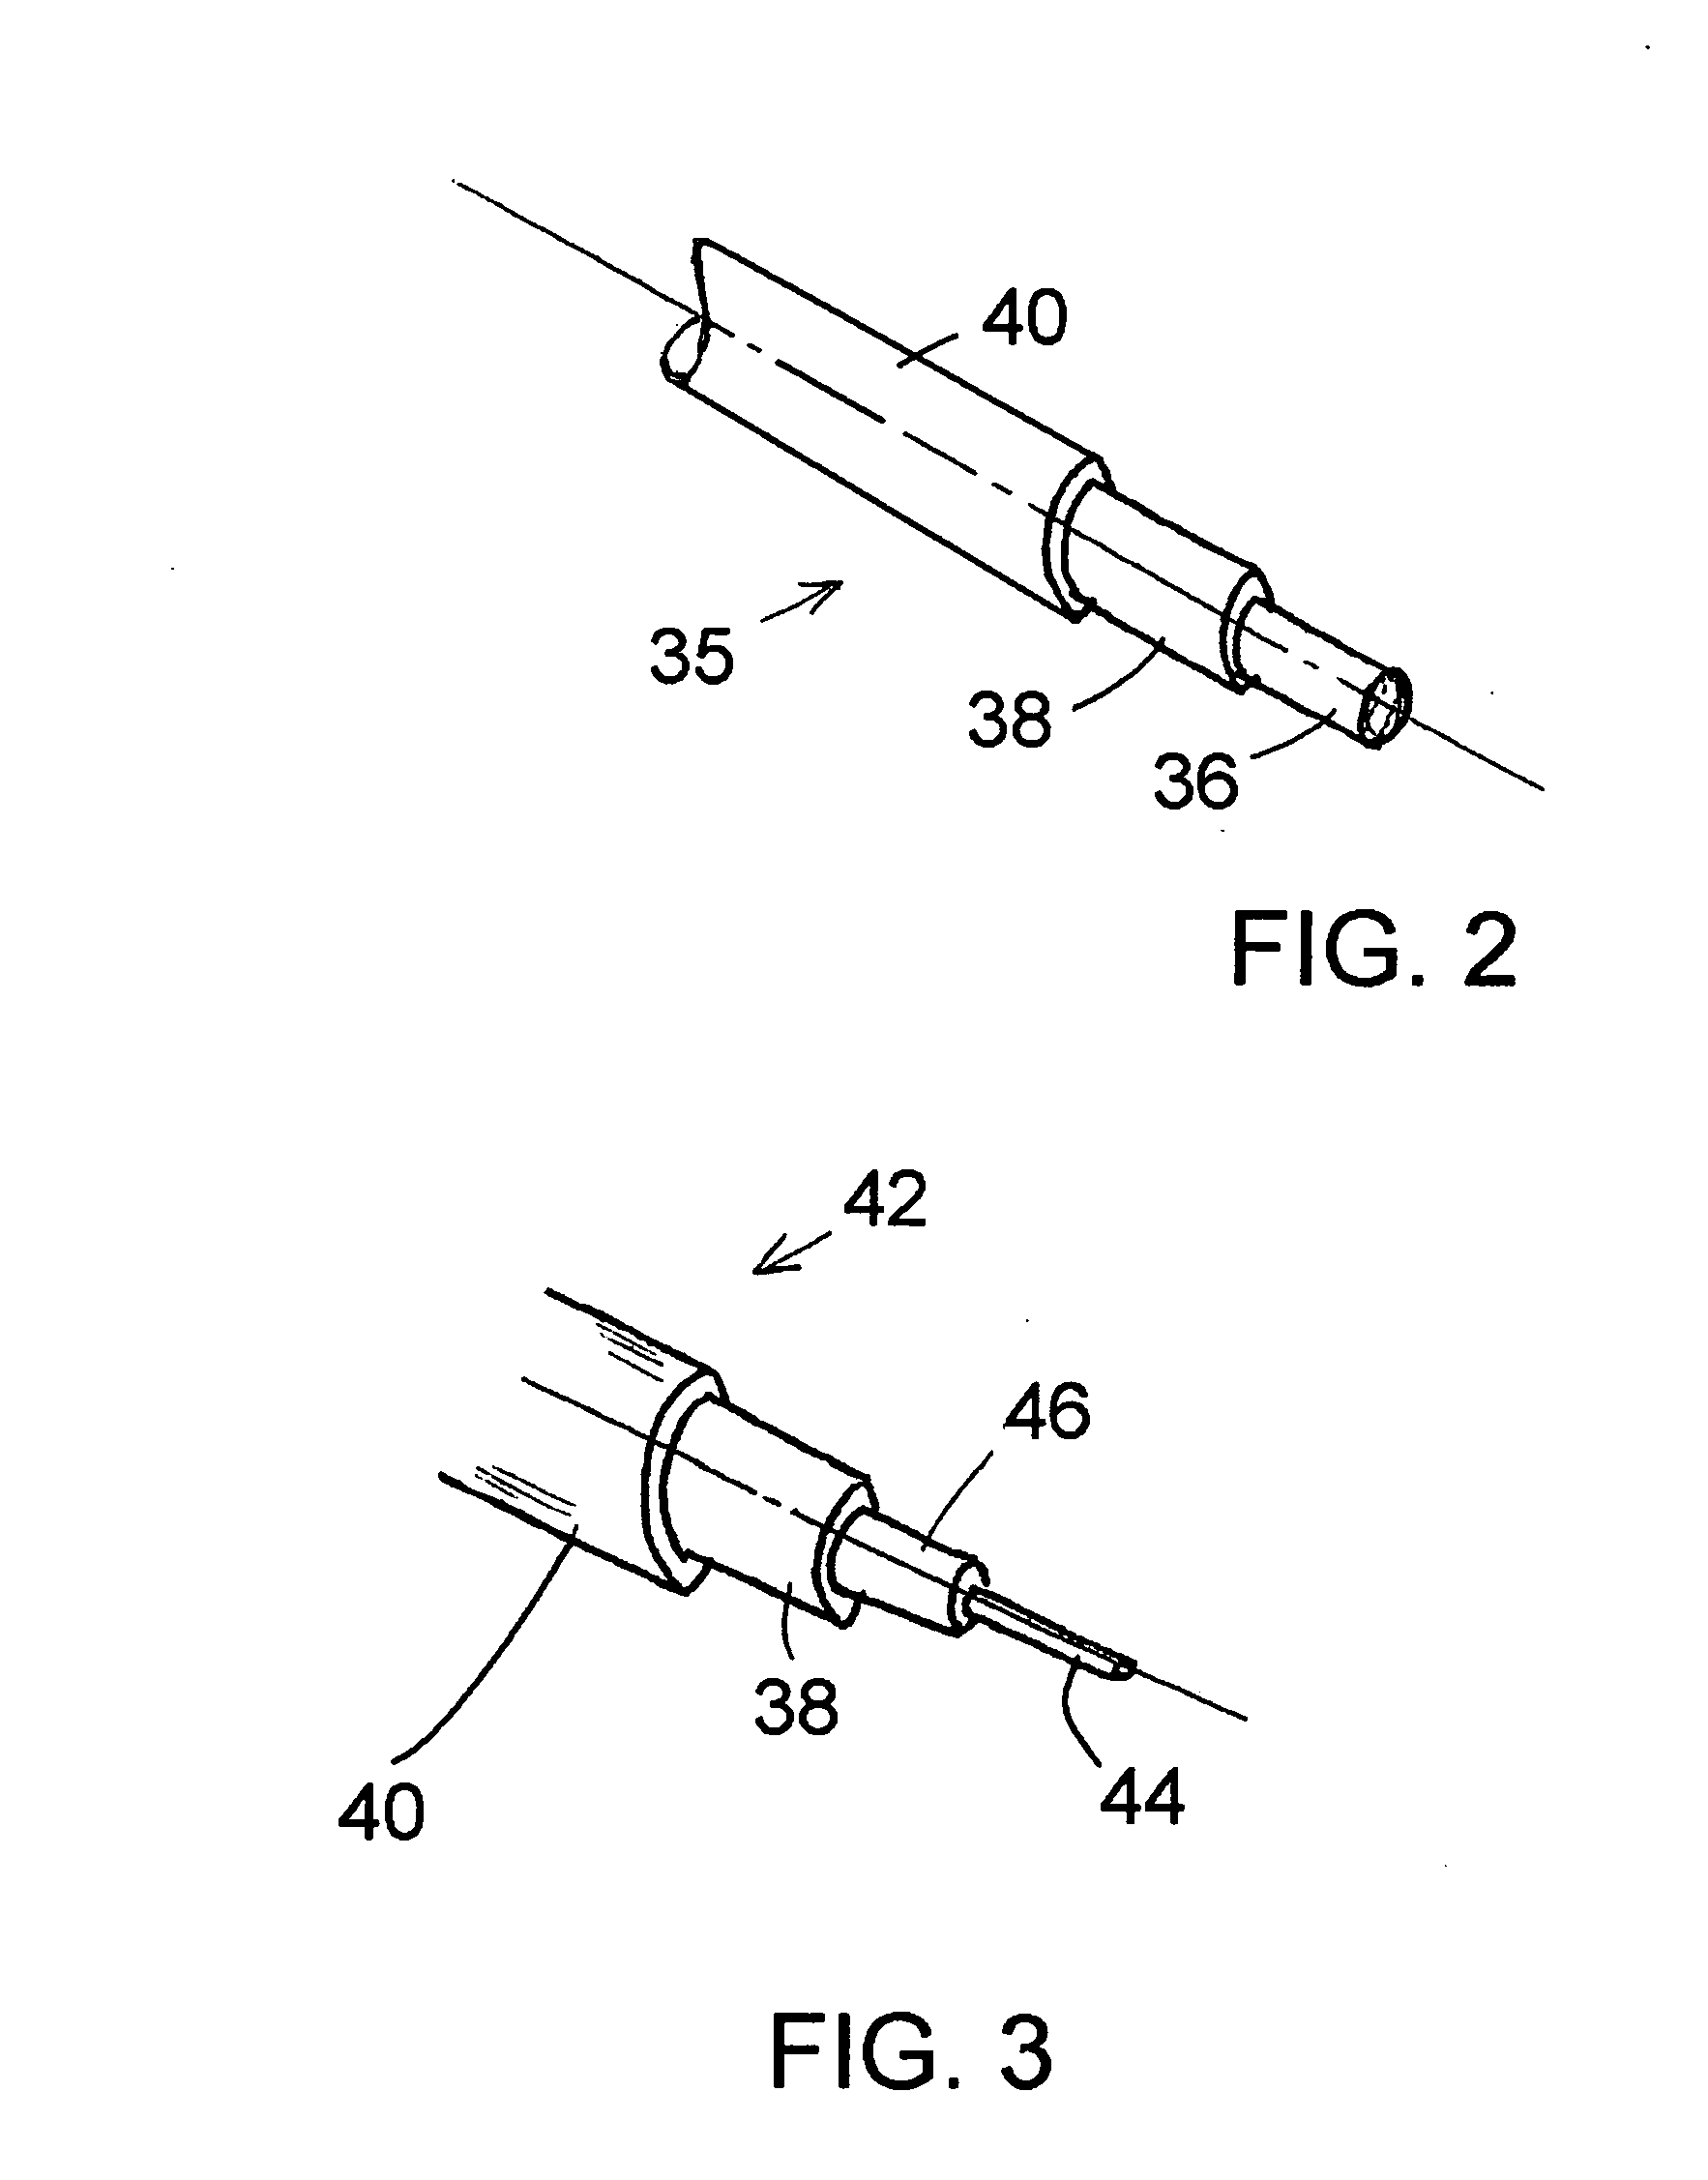 Durable fine wire lead for therapeutic electrostimulation and sensing